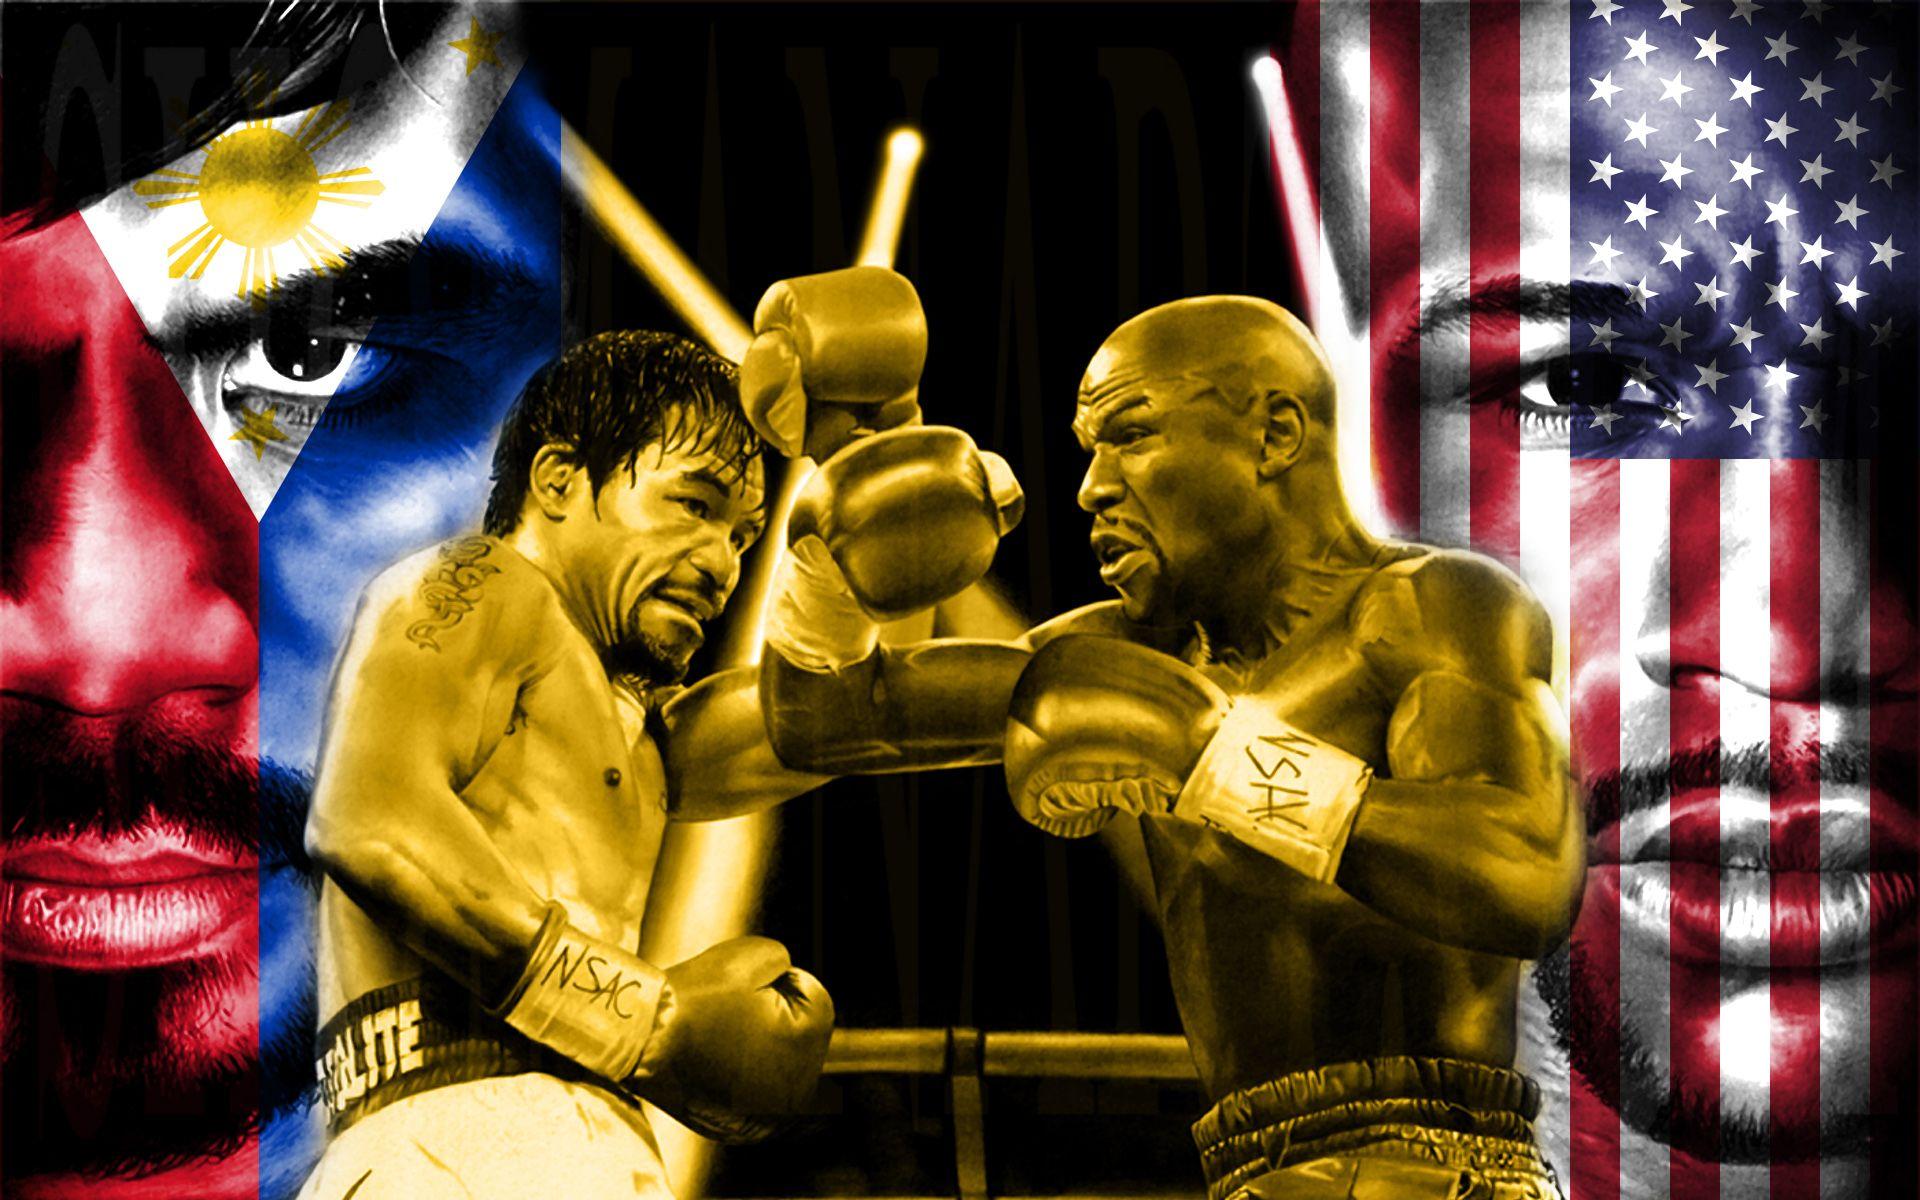 Wallpaper.wiki Manny Pacquiao Philippines Vs Floyd Mayweather Us